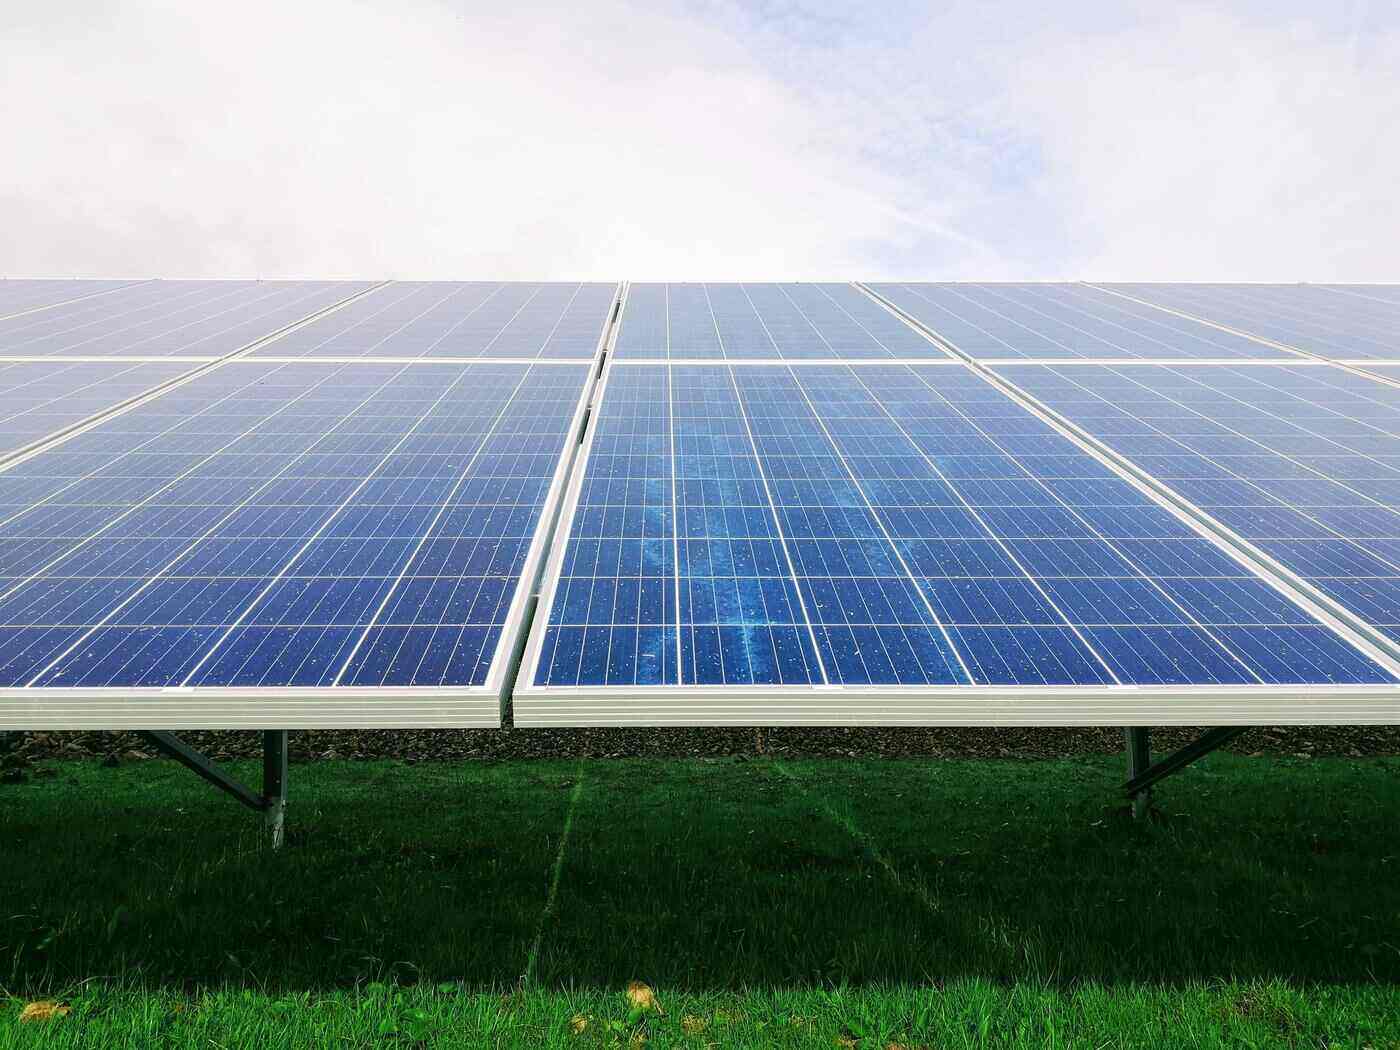 ground mounted solar panels - a guide to solar power - the best alternative to fossil fuels